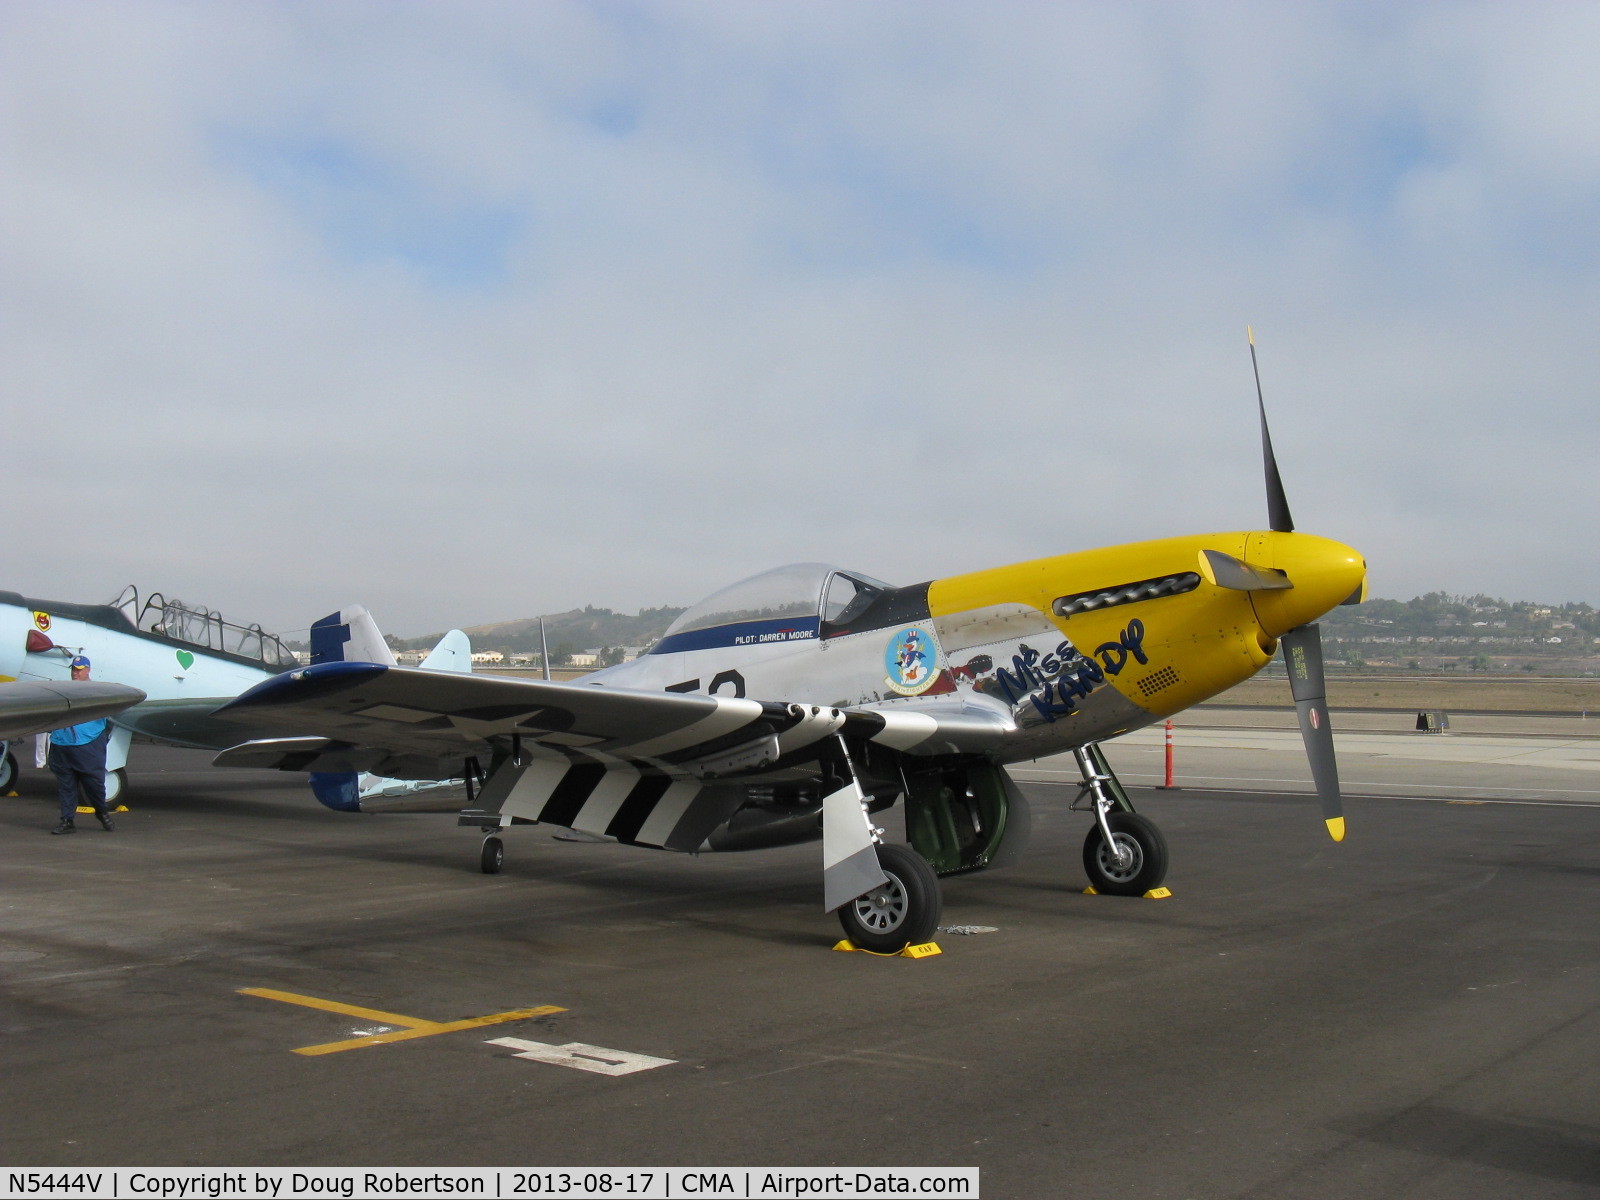 N5444V, 1944 North American F-51D-25-NA Mustang C/N 122-40291, 1944 North American F-51D MUSTANG 'Miss Kandy', Packard-Rolls V1650, Limited class